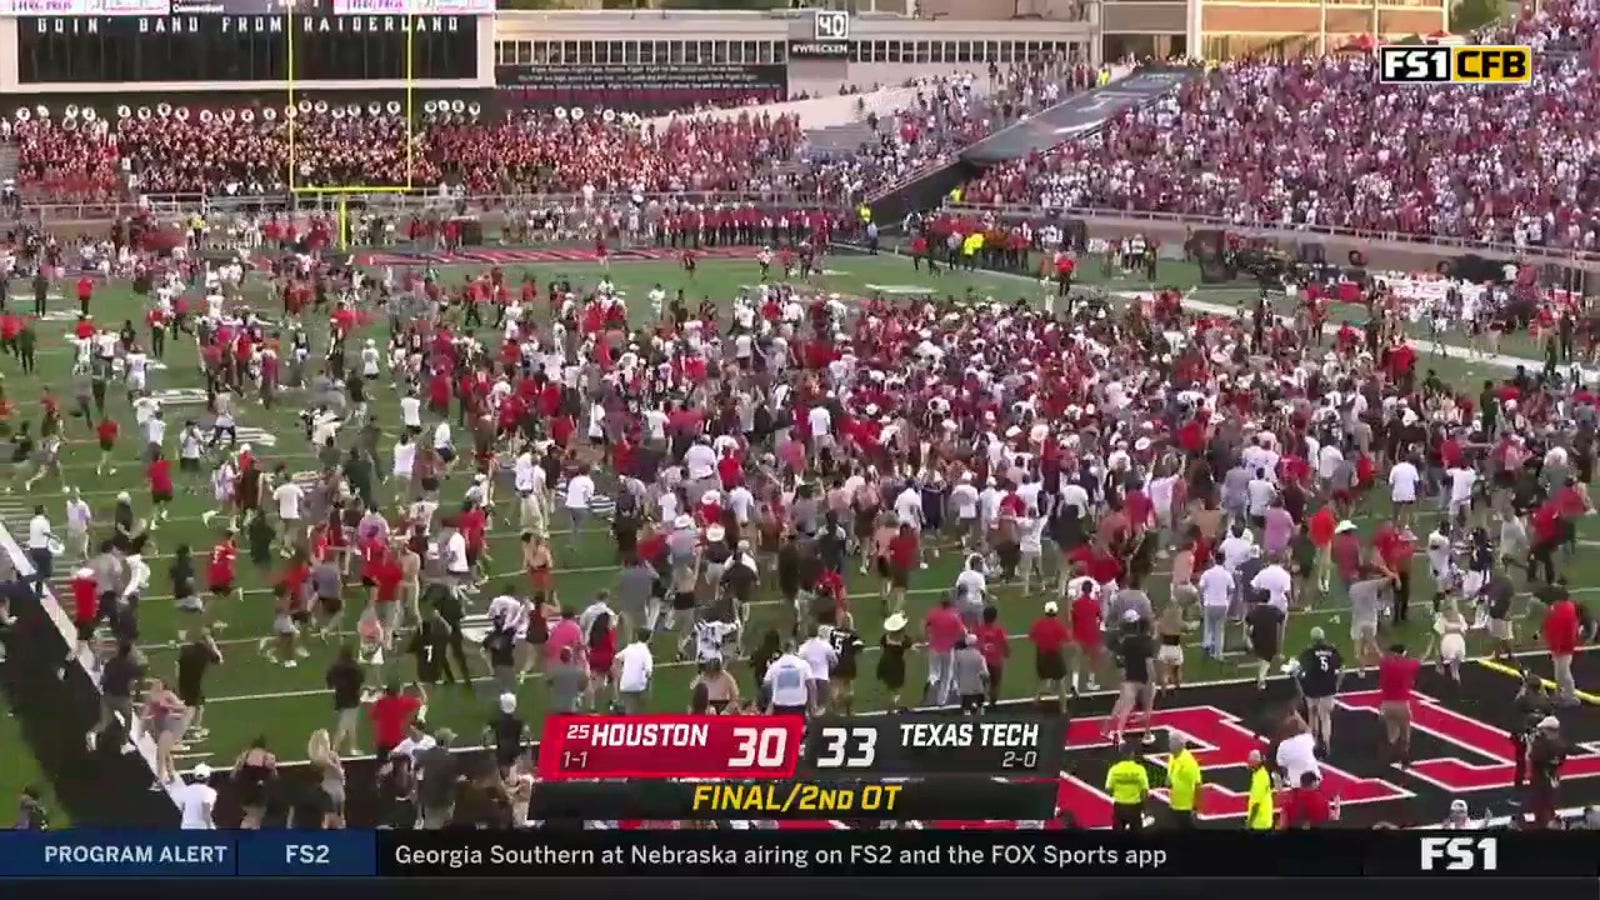 Fans rush the field after Donovan Smith's rushing TD seals Texas Tech's upset victory against No. 25 Houston